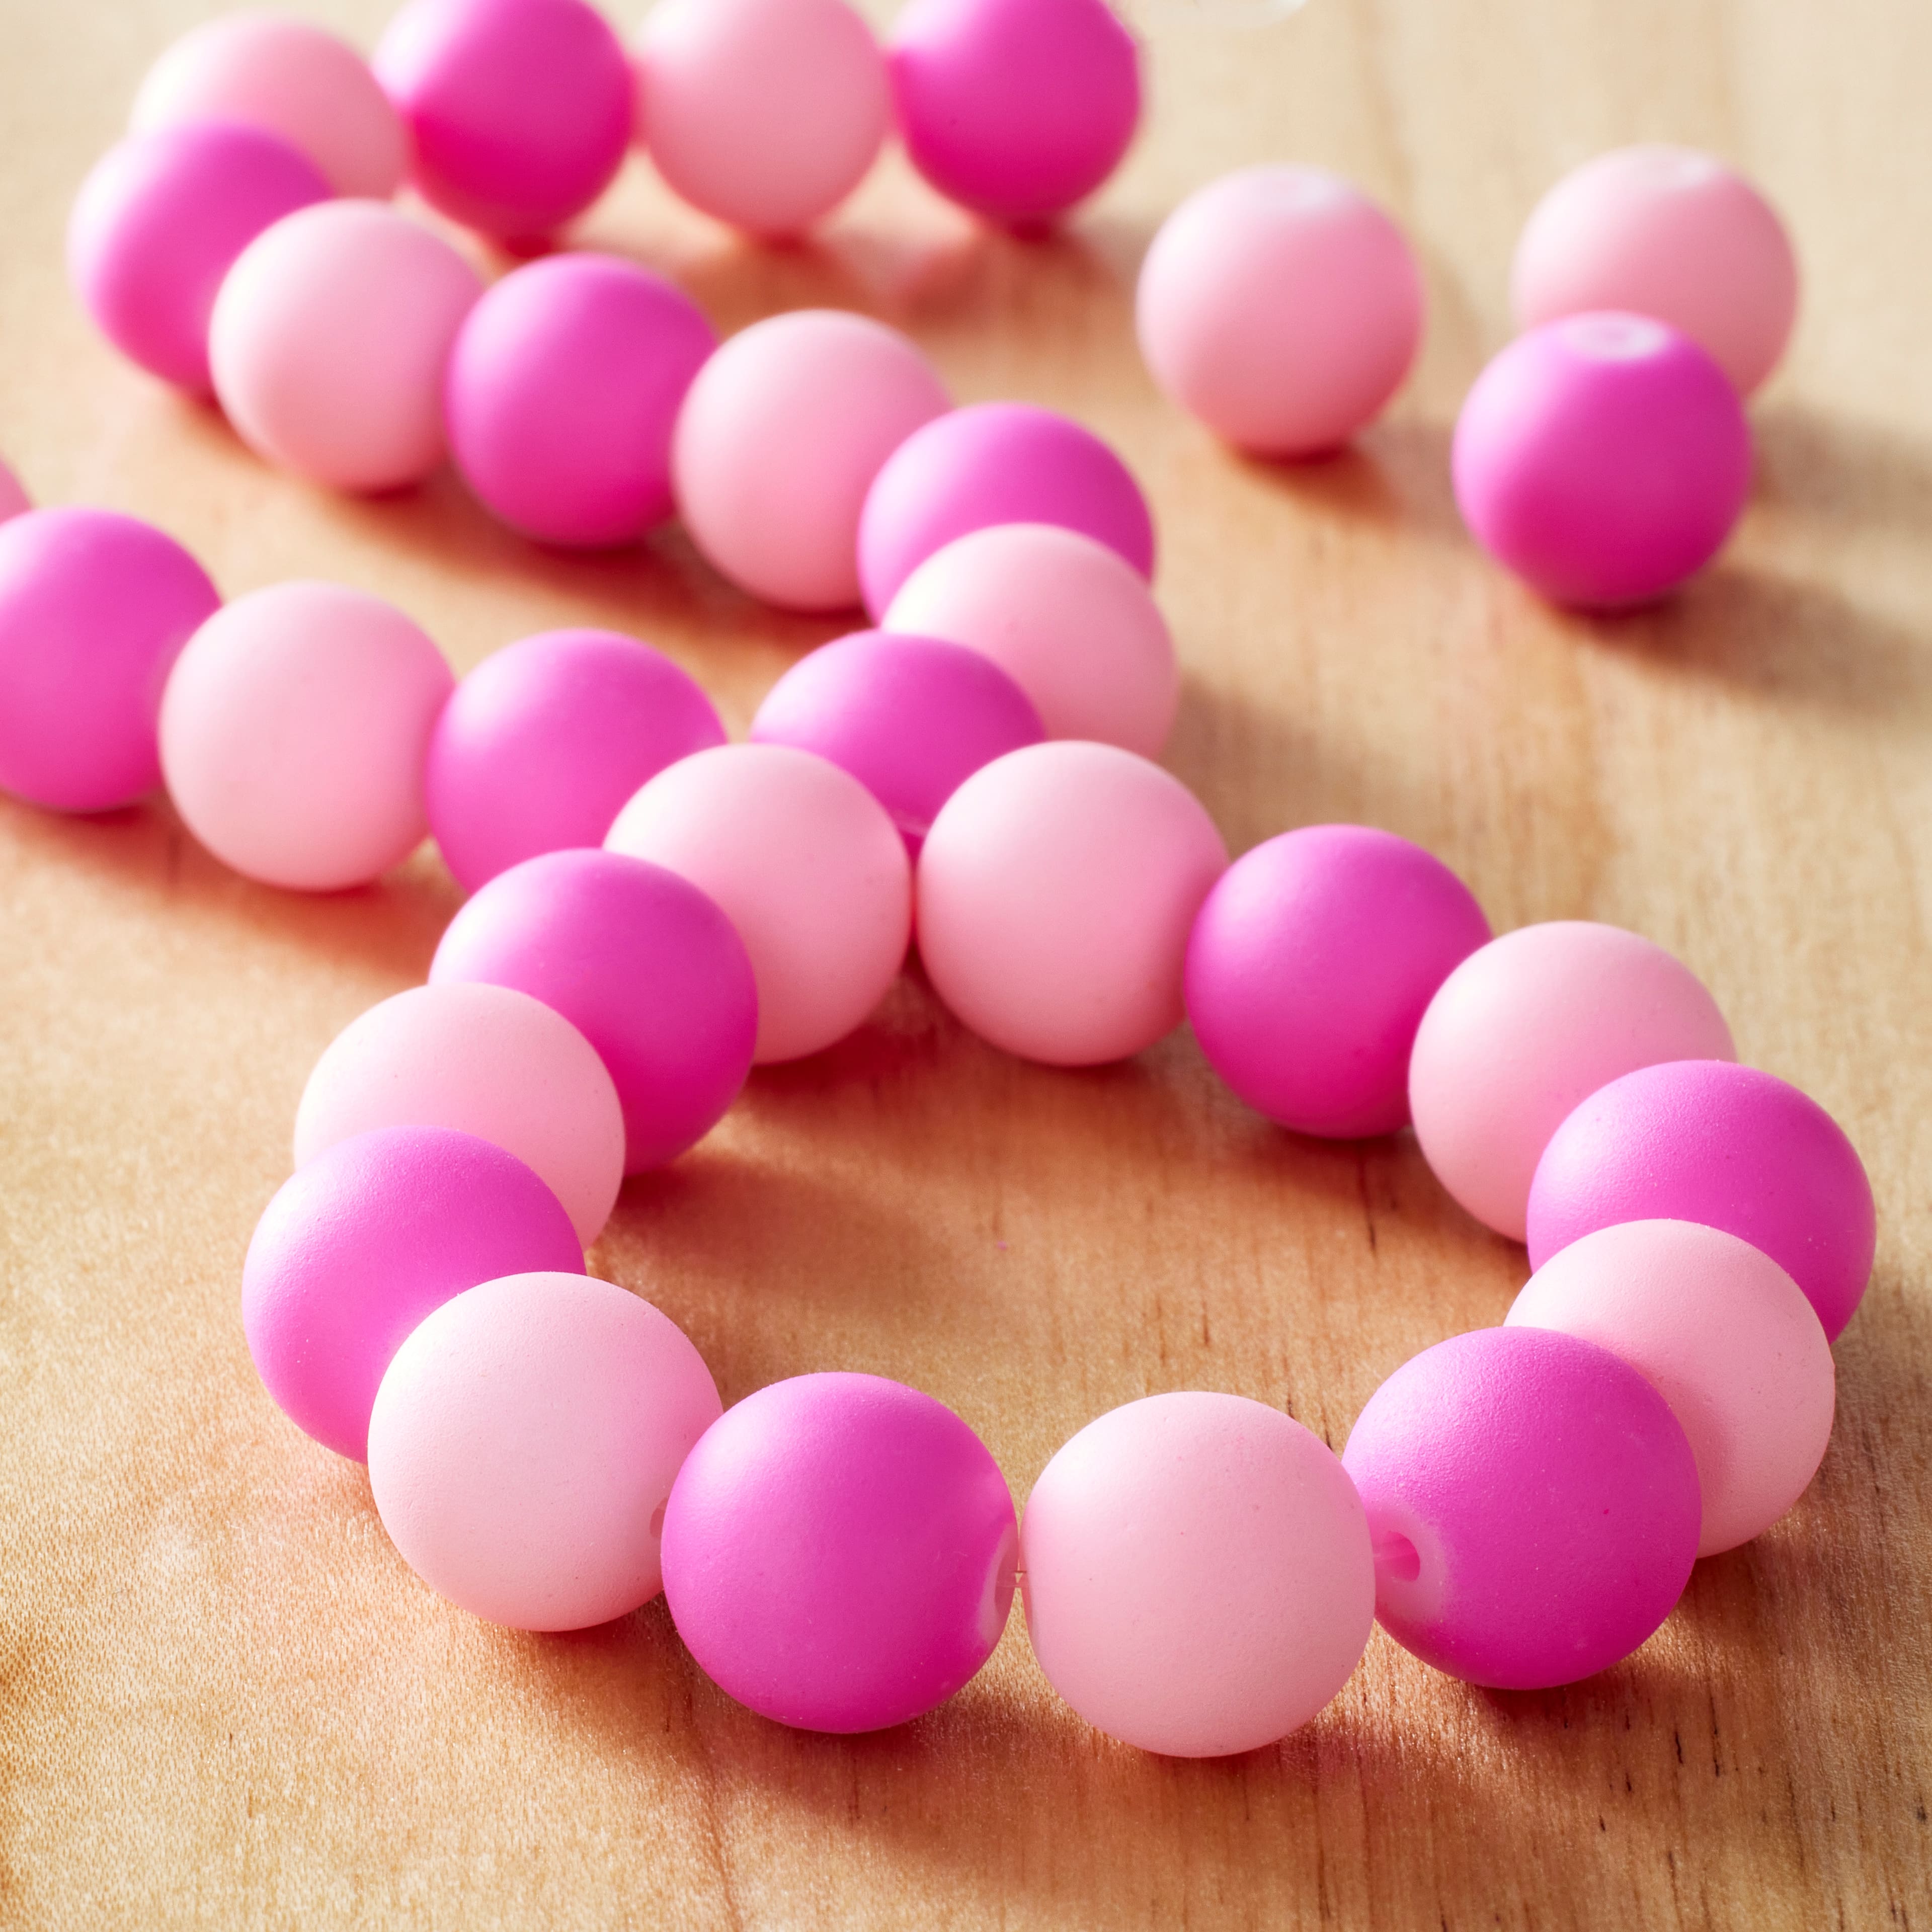 High Quality 8mm Acrylic Beads Frosted Colorful Beads Plastic Round Beads Small Pink Beads Jewelry Making Beads Bracelet Beads DIY Necklace